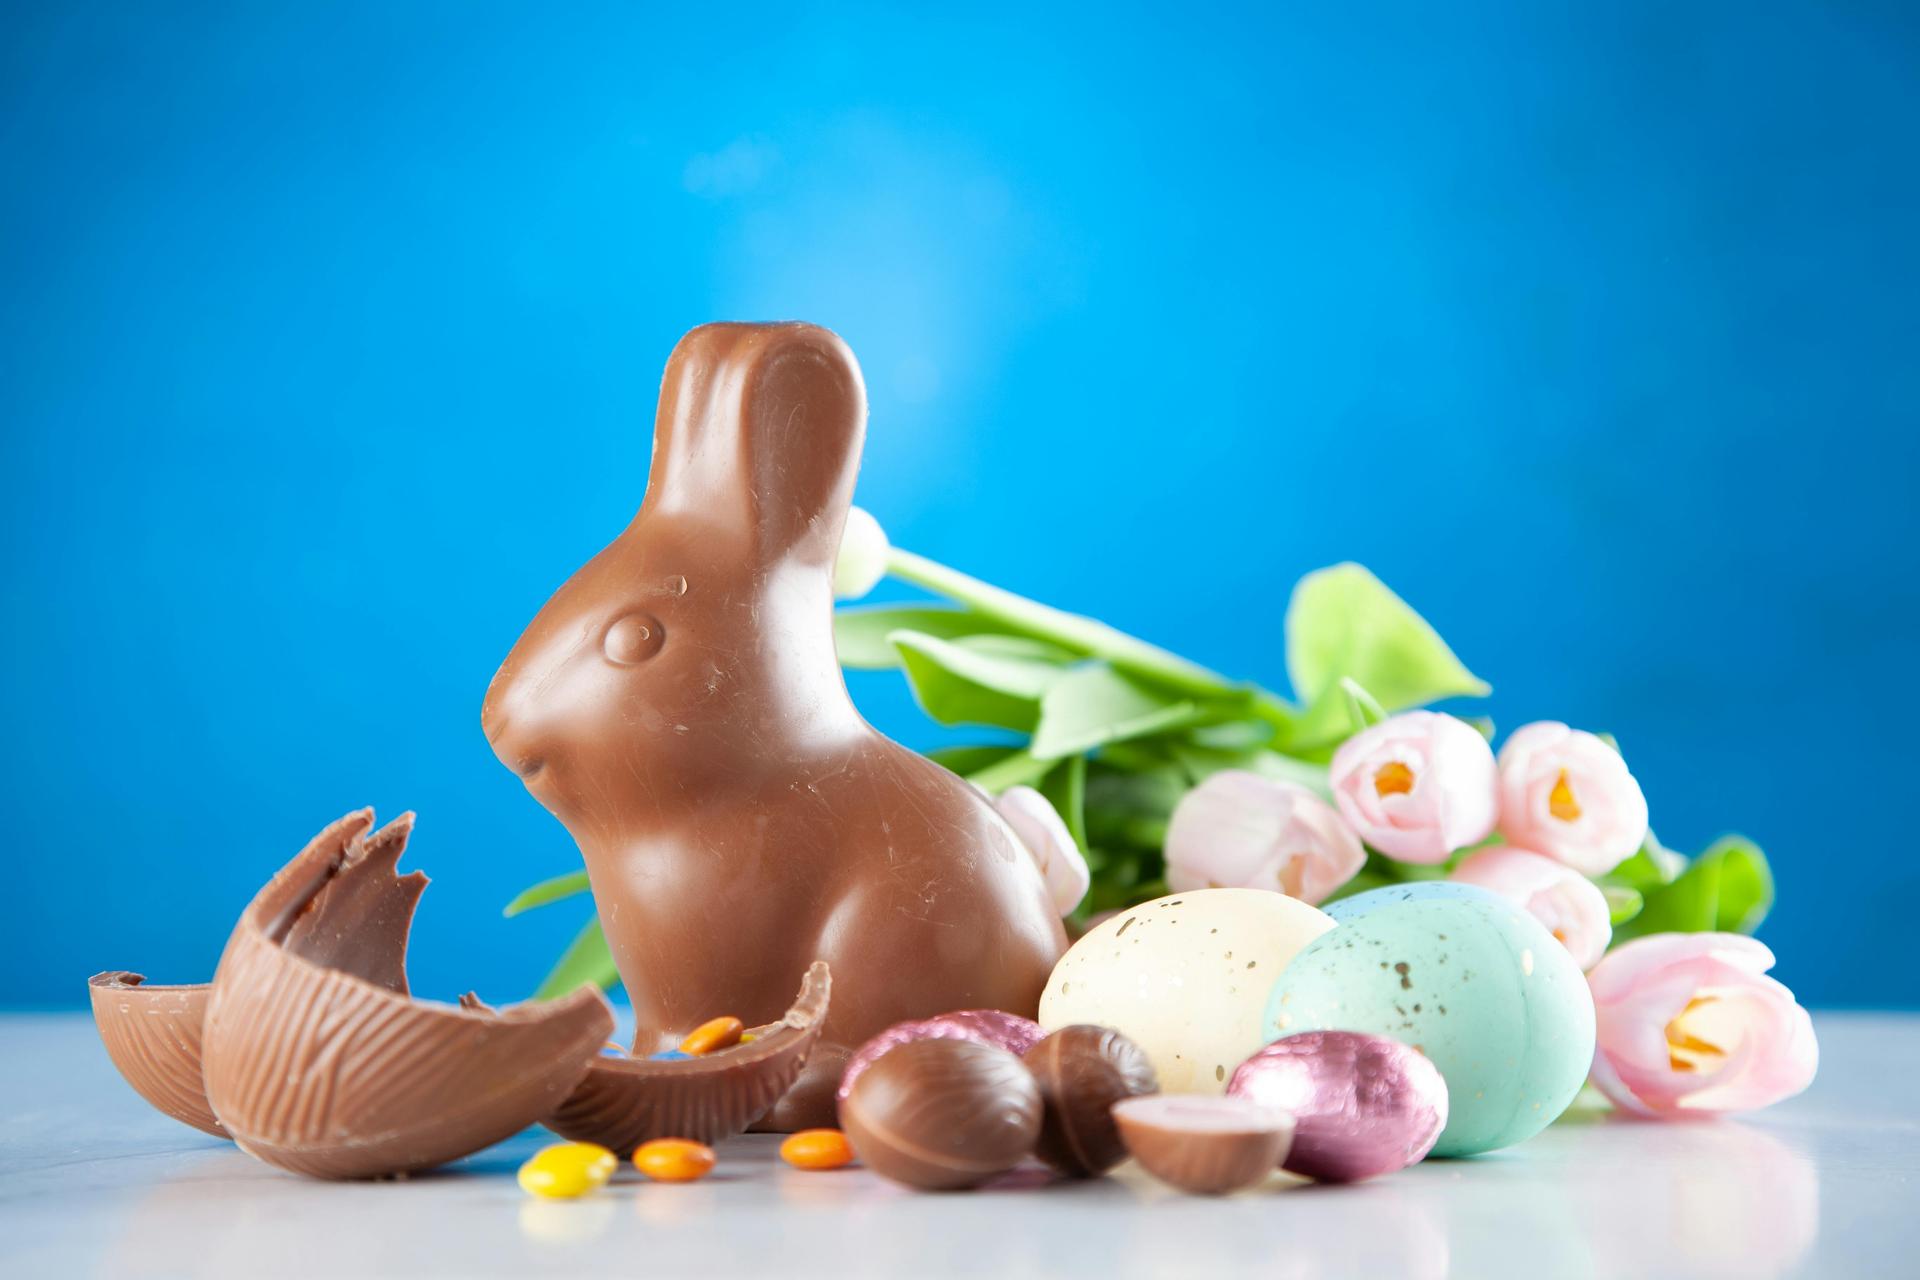 Feeling like you’ve over-indulged on Easter eggs? Me too! How can we get back on track?